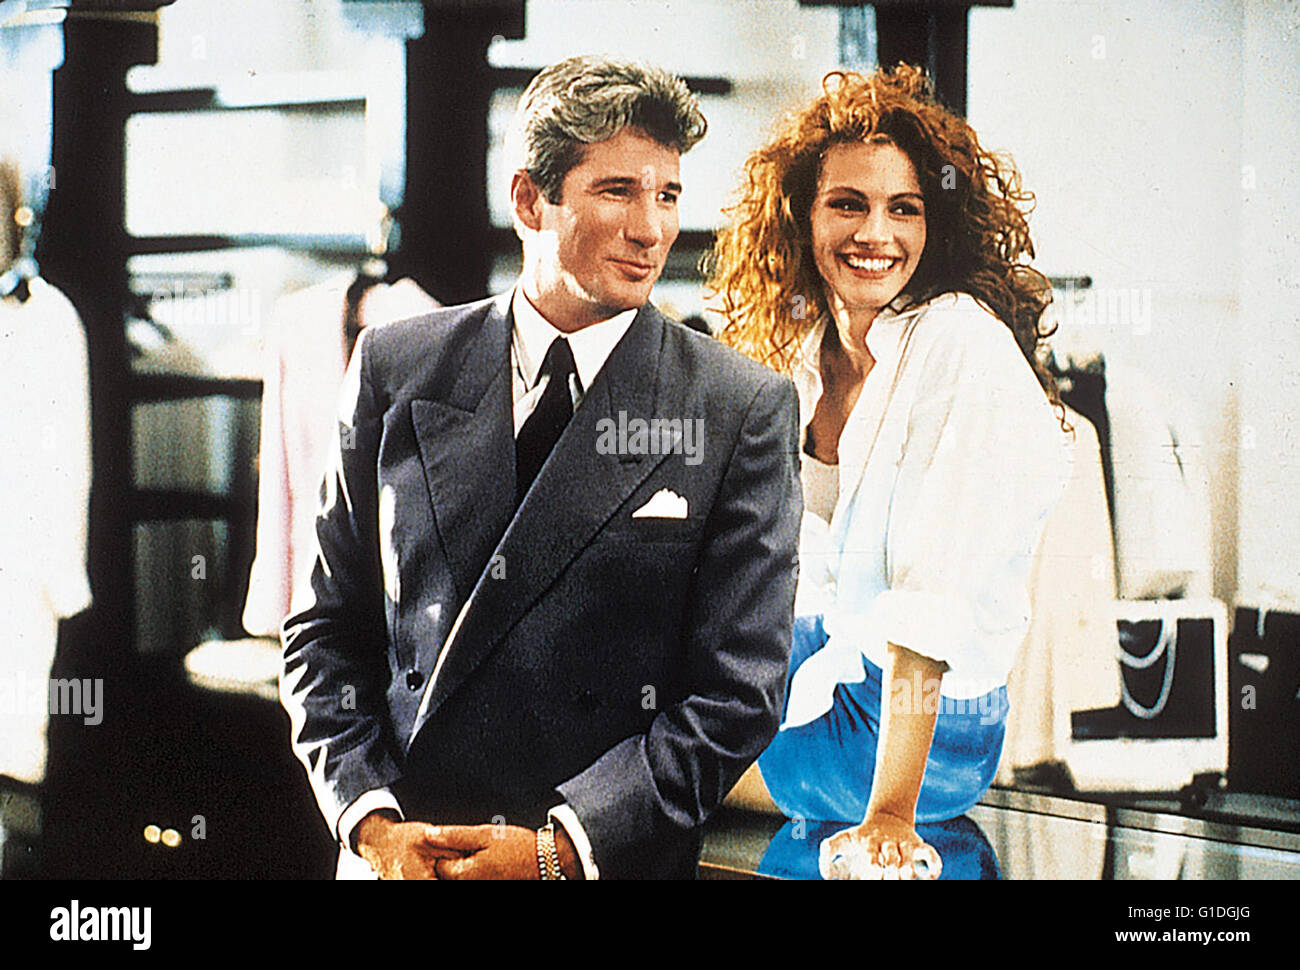 Pretty Woman: How Julia Roberts and Richard Gere have changed in